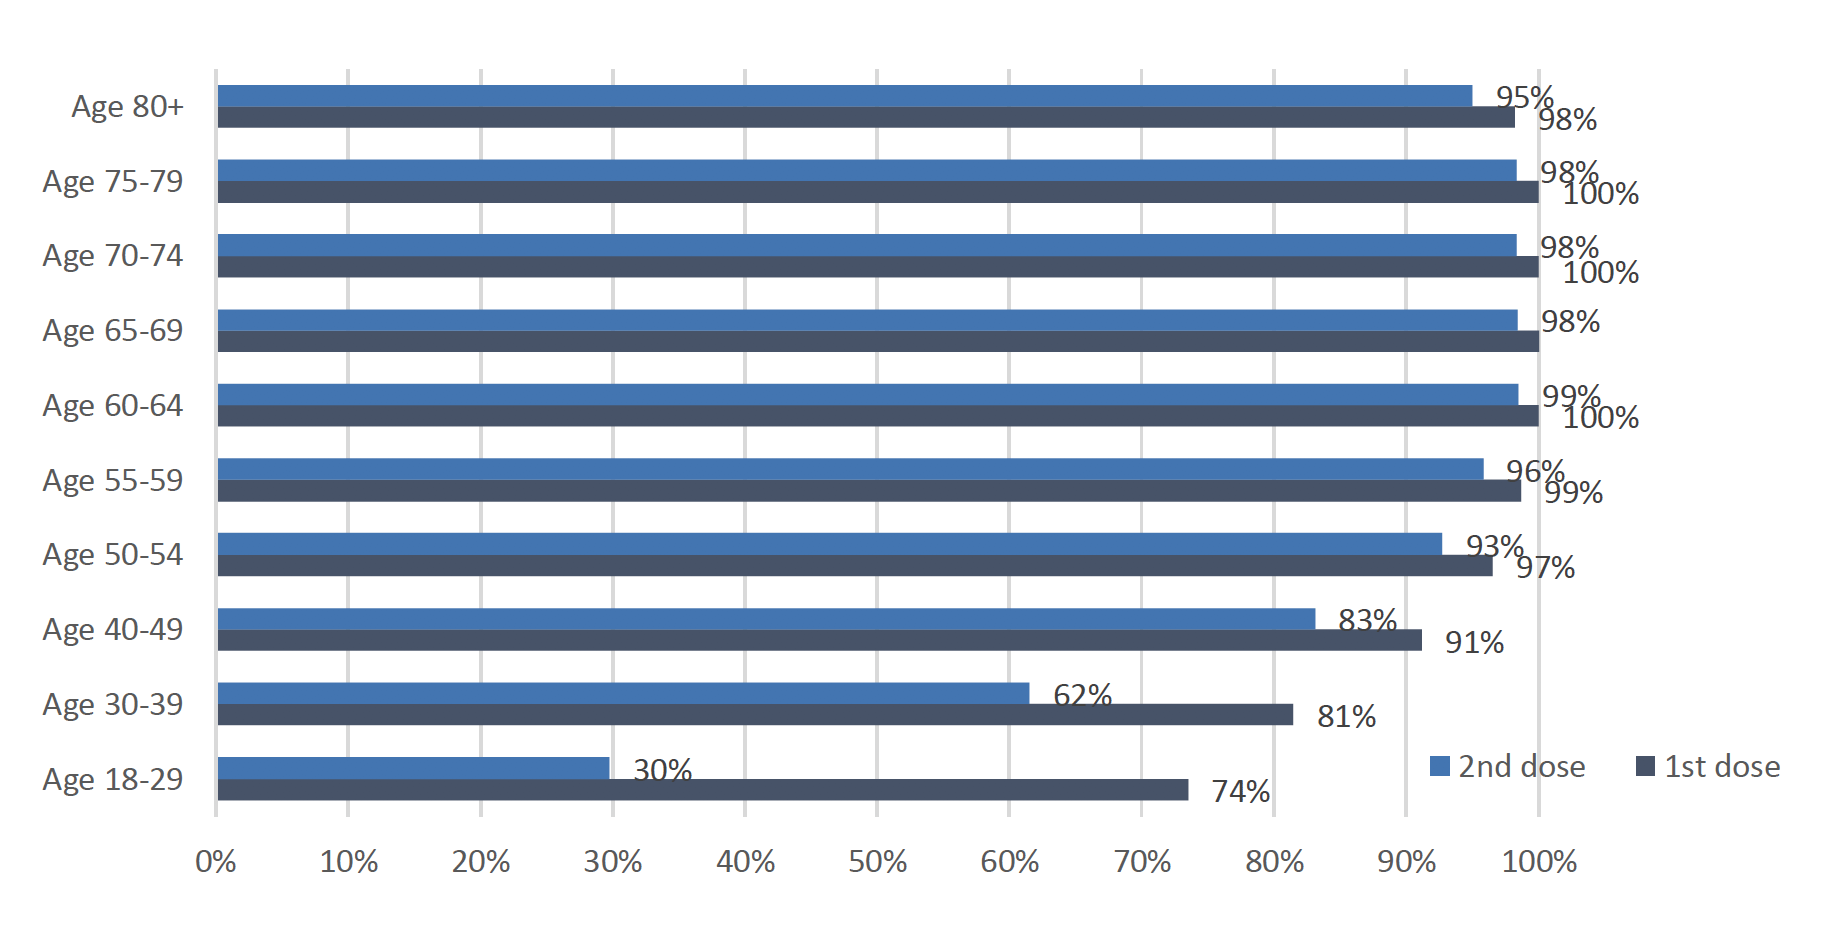 This bar chart shows the percentage of people that have received their first and second dose of the Covid vaccine so far, for 10 age groups. The six groups aged over 55 have more than 98% of people vaccinated with the first dose and more than 95% of people vaccinated with the second dose. Of those aged 50-54, 97% have received their first dose and 93% have received their second dose. Younger age groups have lower percentages vaccinated, with 91% of 40-49 year olds having received their first dose and 83% the second dose, 81% of the 30-39 year olds having received their first and 62% having received their second dose, and 74% of 18 to 29 year olds having received the first dose and only 30% having received the second dose.